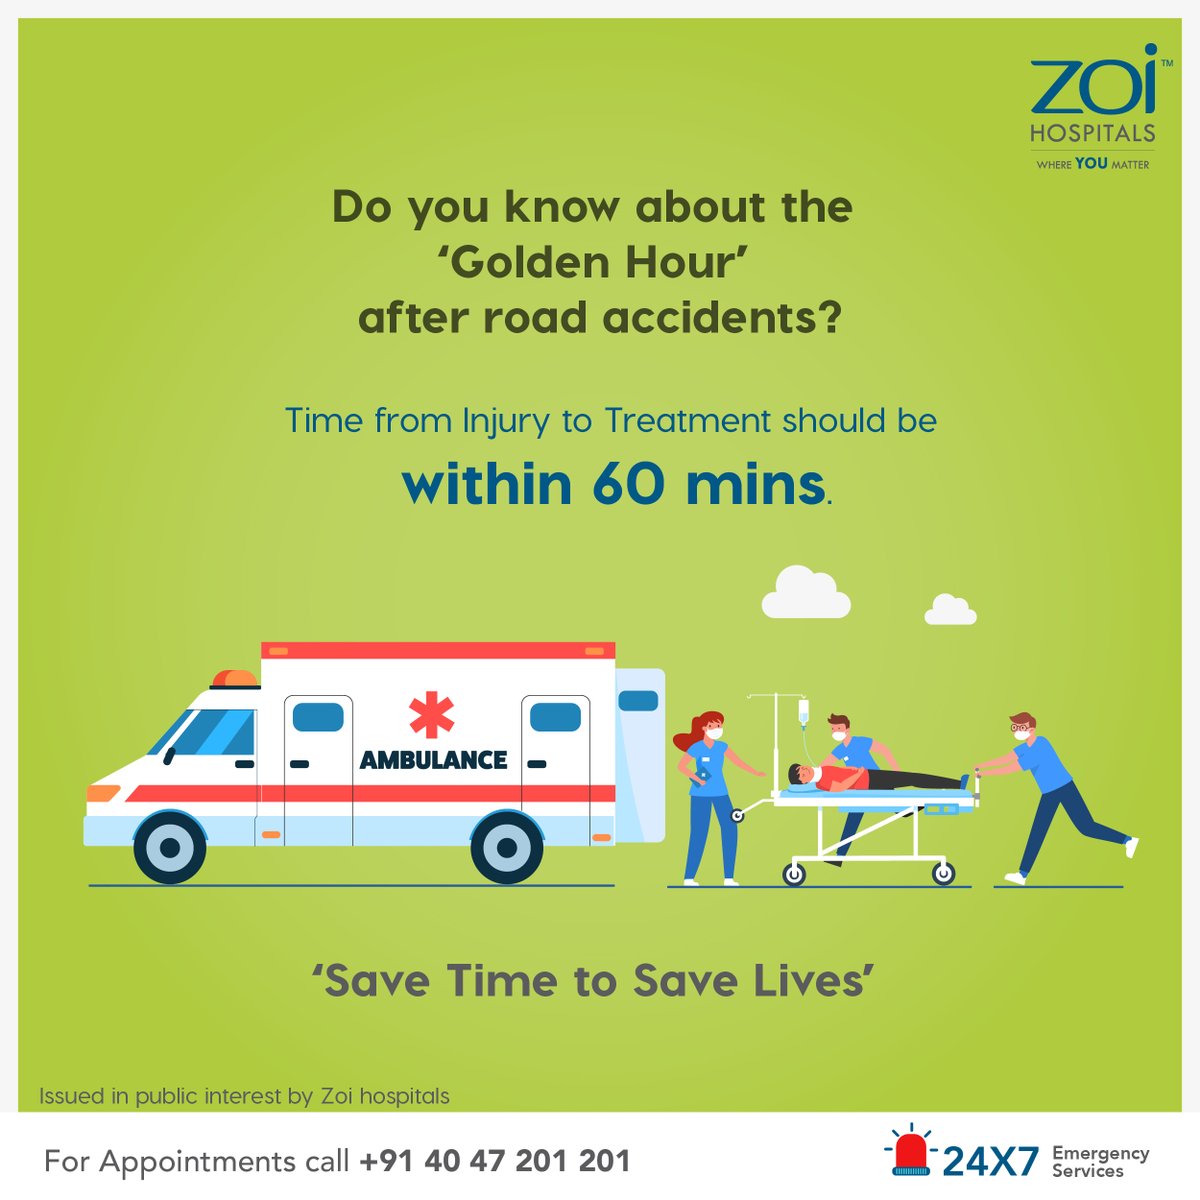 Studies prove there is a higher chance of survival & recovery when the #accident victim is stabilized within 60mins of the incident.
#EmergencyandCriticalCare @ZoiHospitals take the initiative of spreading awareness about #RTA & how quick actions can save lives.  
#Hyderabad #Zoi